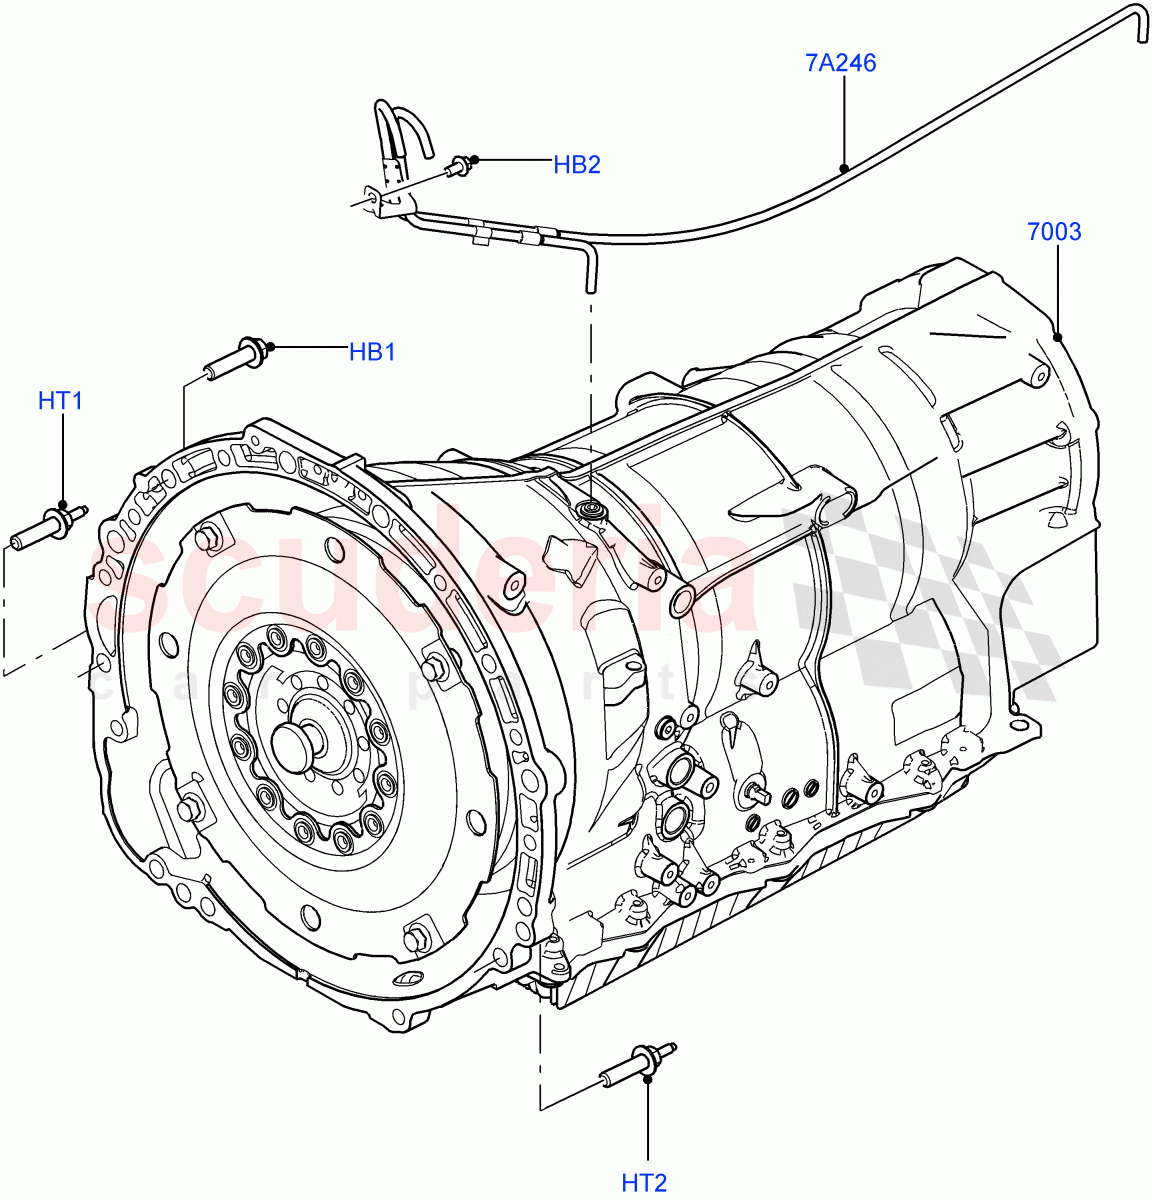 Auto Trans Assy & Speedometer Drive(Nitra Plant Build)(4.4L DOHC DITC V8 Diesel,8 Speed Auto Trans ZF 8HP70 4WD,3.0 V6 Diesel)((V)FROMK2000001) of Land Rover Land Rover Discovery 5 (2017+) [3.0 I6 Turbo Diesel AJ20D6]